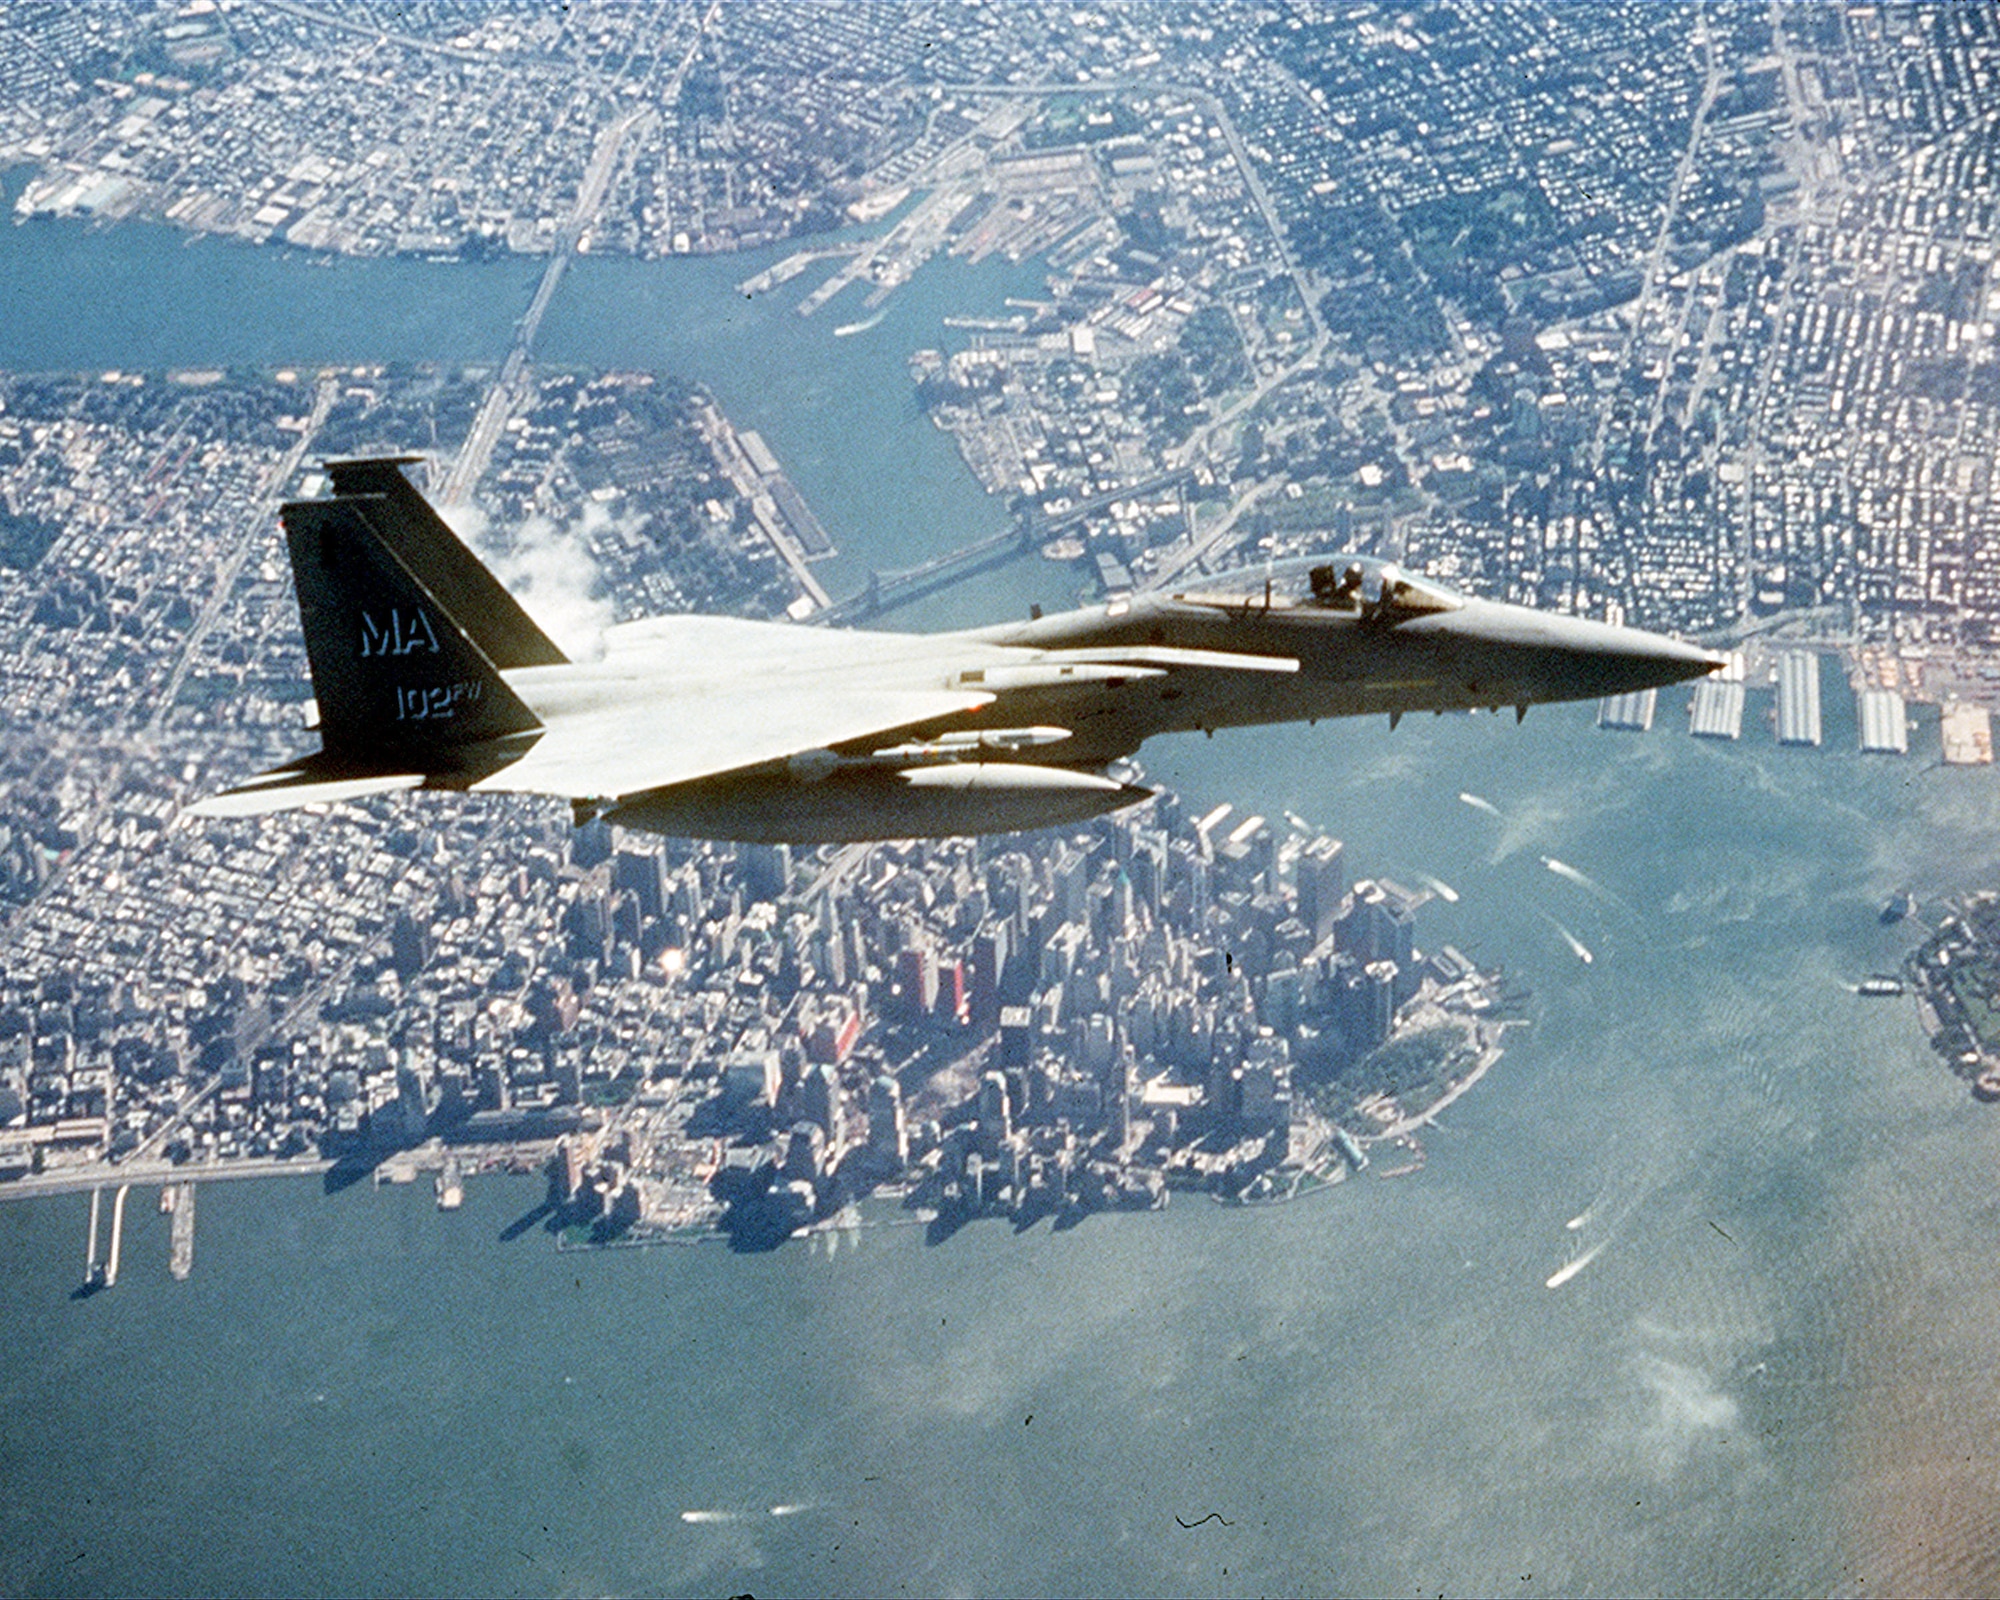 An F-15 flies over lower Manhattan and Ground Zero during an Operation Noble Eagle combat air patrol mission several months after the 9/11 attacks.  